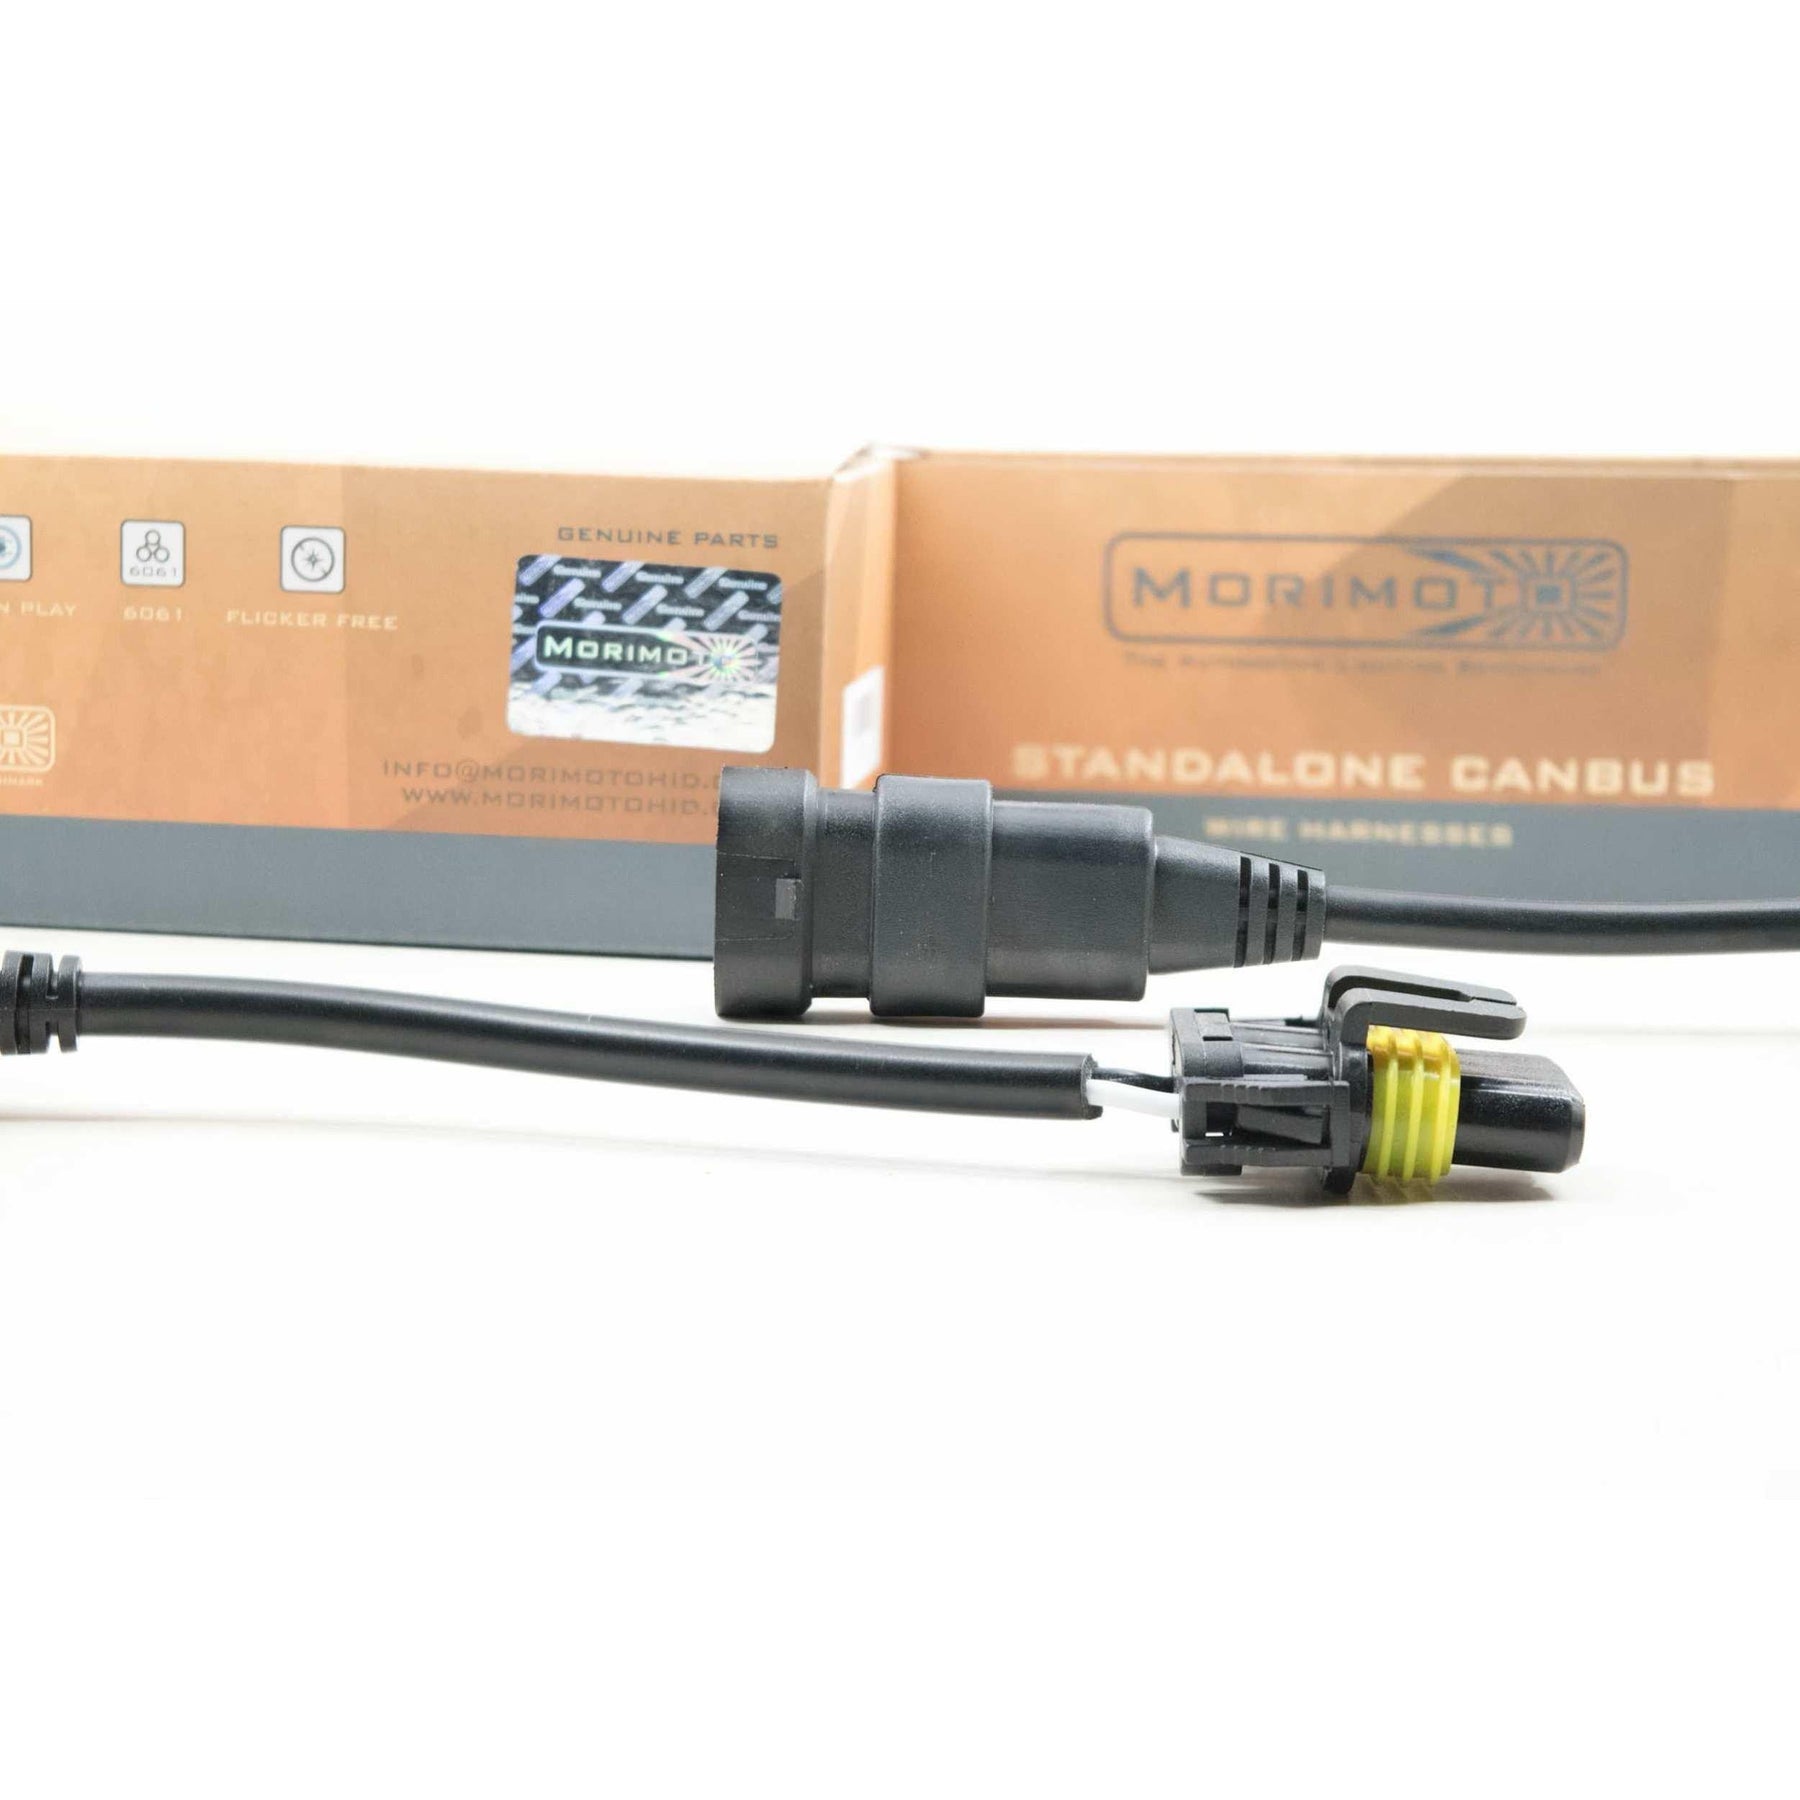 5202/PSX24W Standalone Canbus Harness (H230)-Can Bus Harness-Morimoto-H230-Dirty Diesel Customs